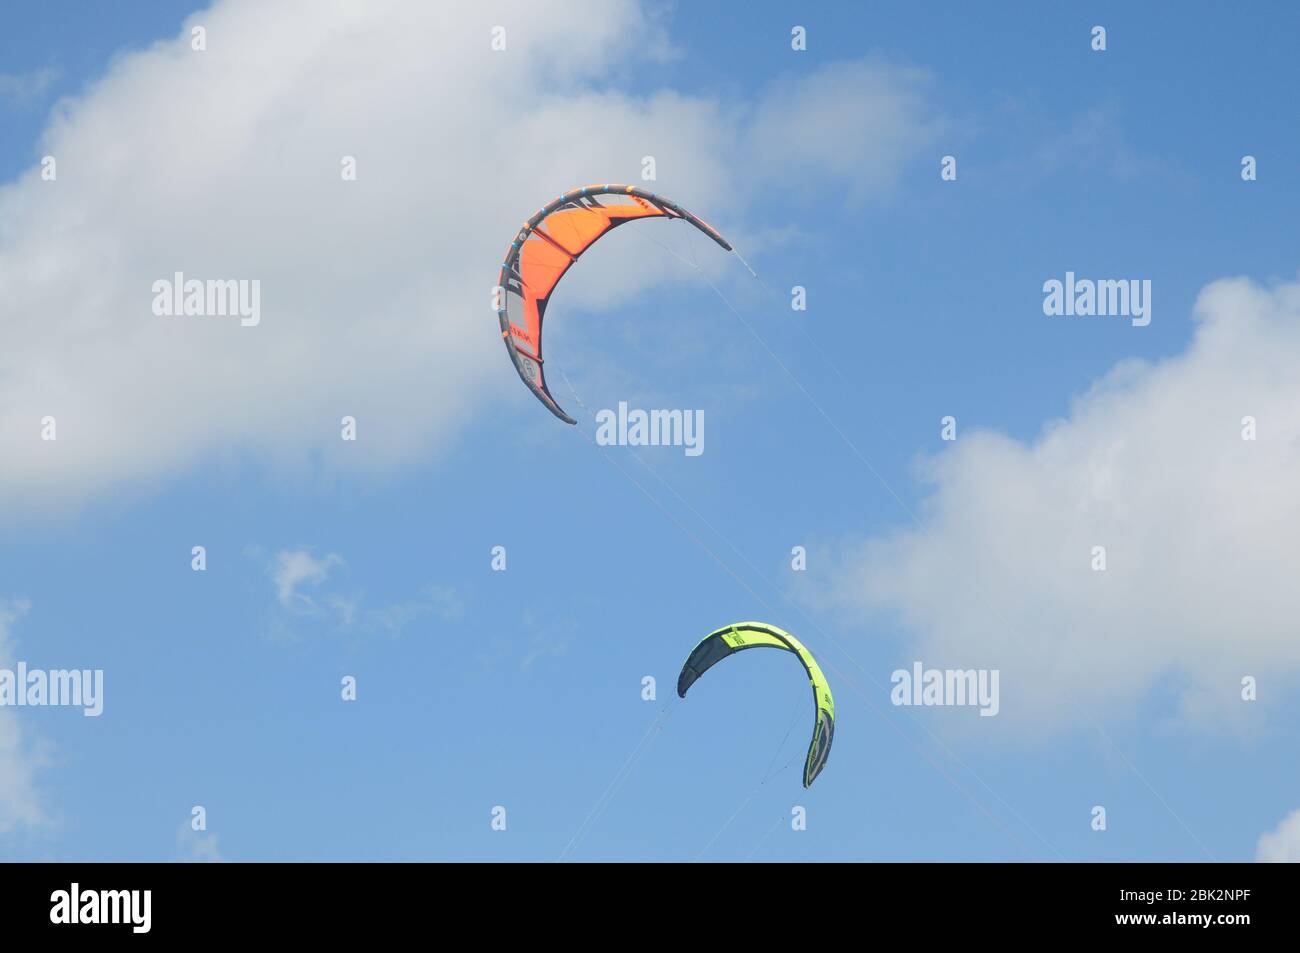 Kite surfing aerofoils or wings flying against a sunny blue sky Stock Photo